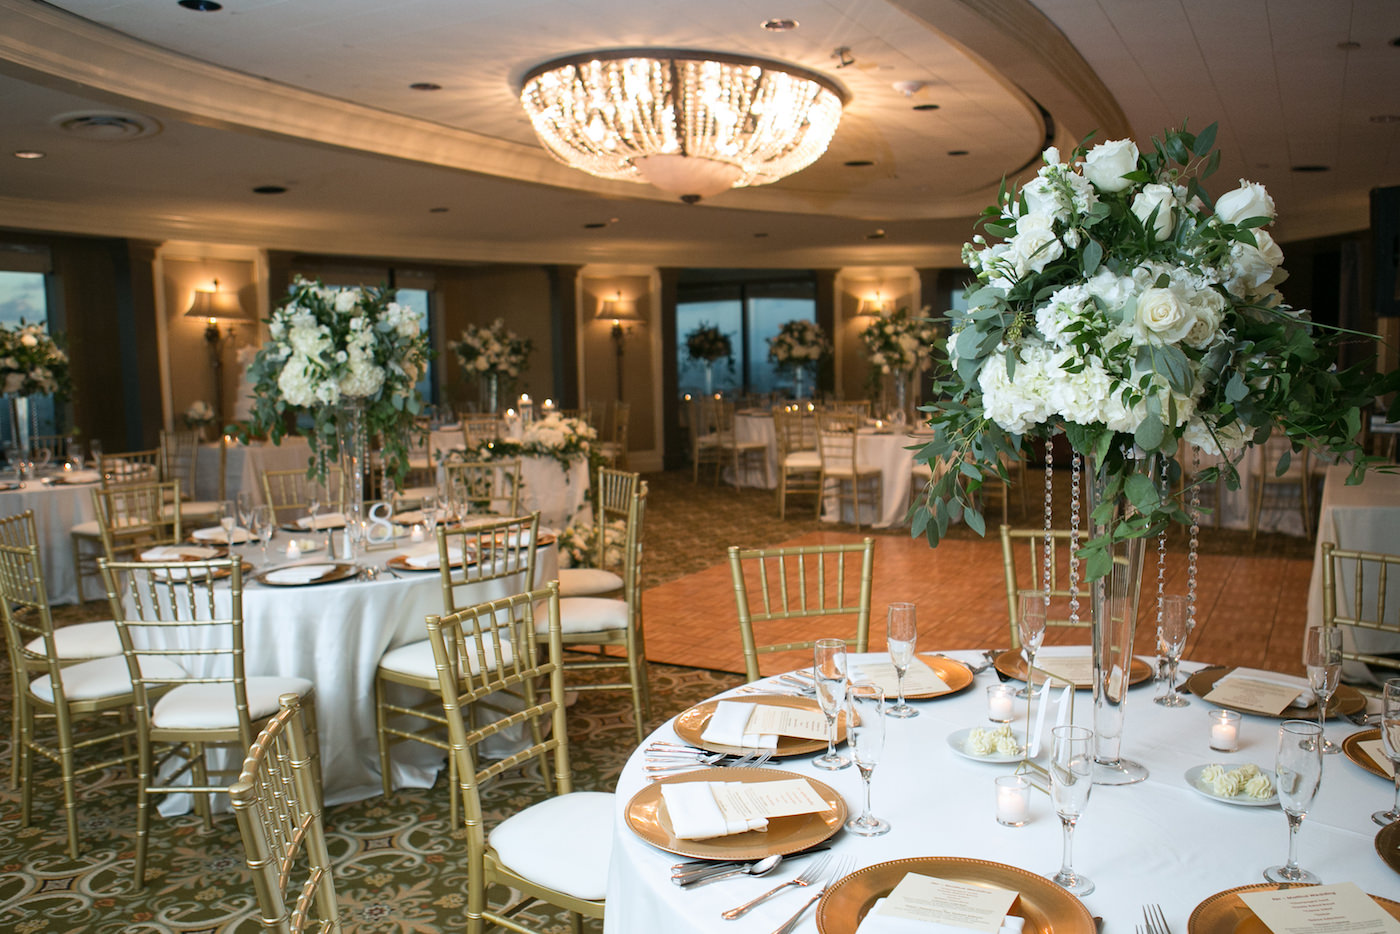 Romantic Classic Wedding Reception Decor, Round Tables with Gold Chiavari Chairs, Tall White Hydrangeas and Roses with Greenery and Hanging Crystals Floral Centerpieces, Gold Chargers | Wedding Photographer Carrie Wildes Photography | Ballroom Wedding Venue The Tampa Club